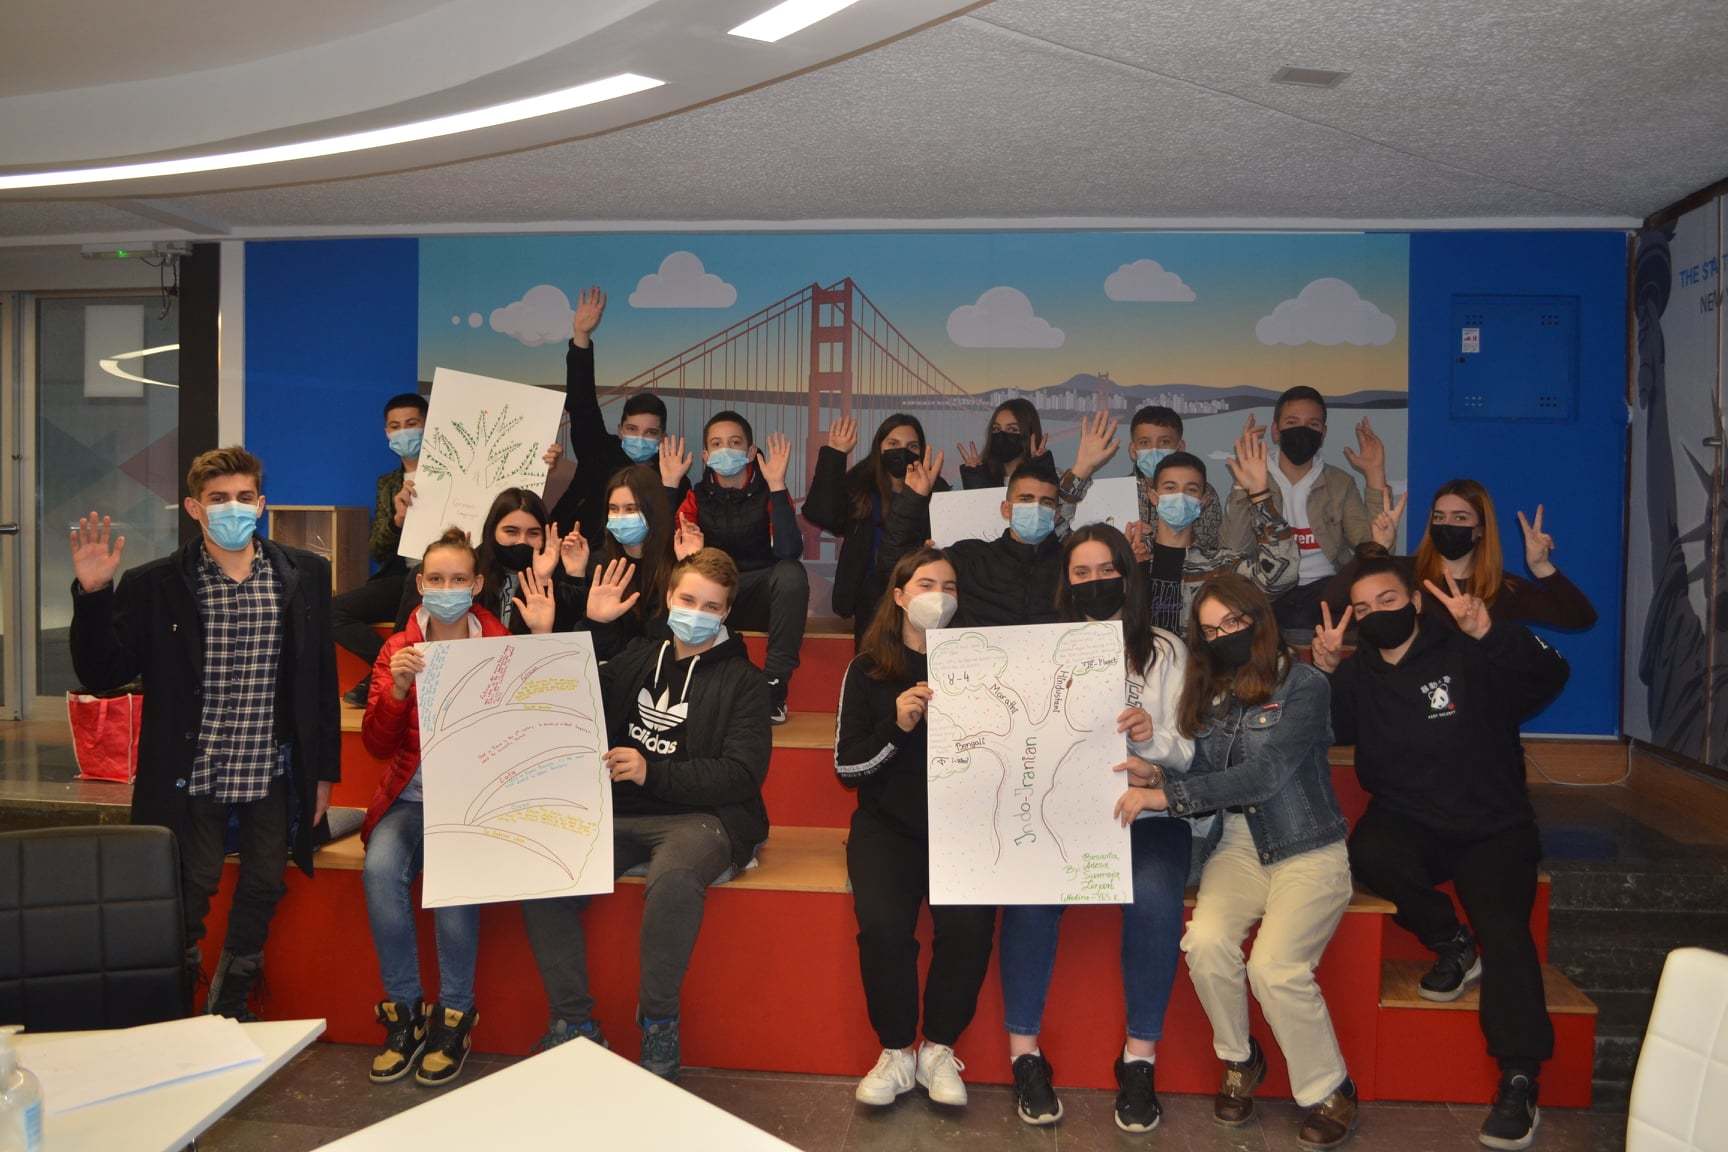 Group of students who participated in the event are holding posters highlighting different languages of the world